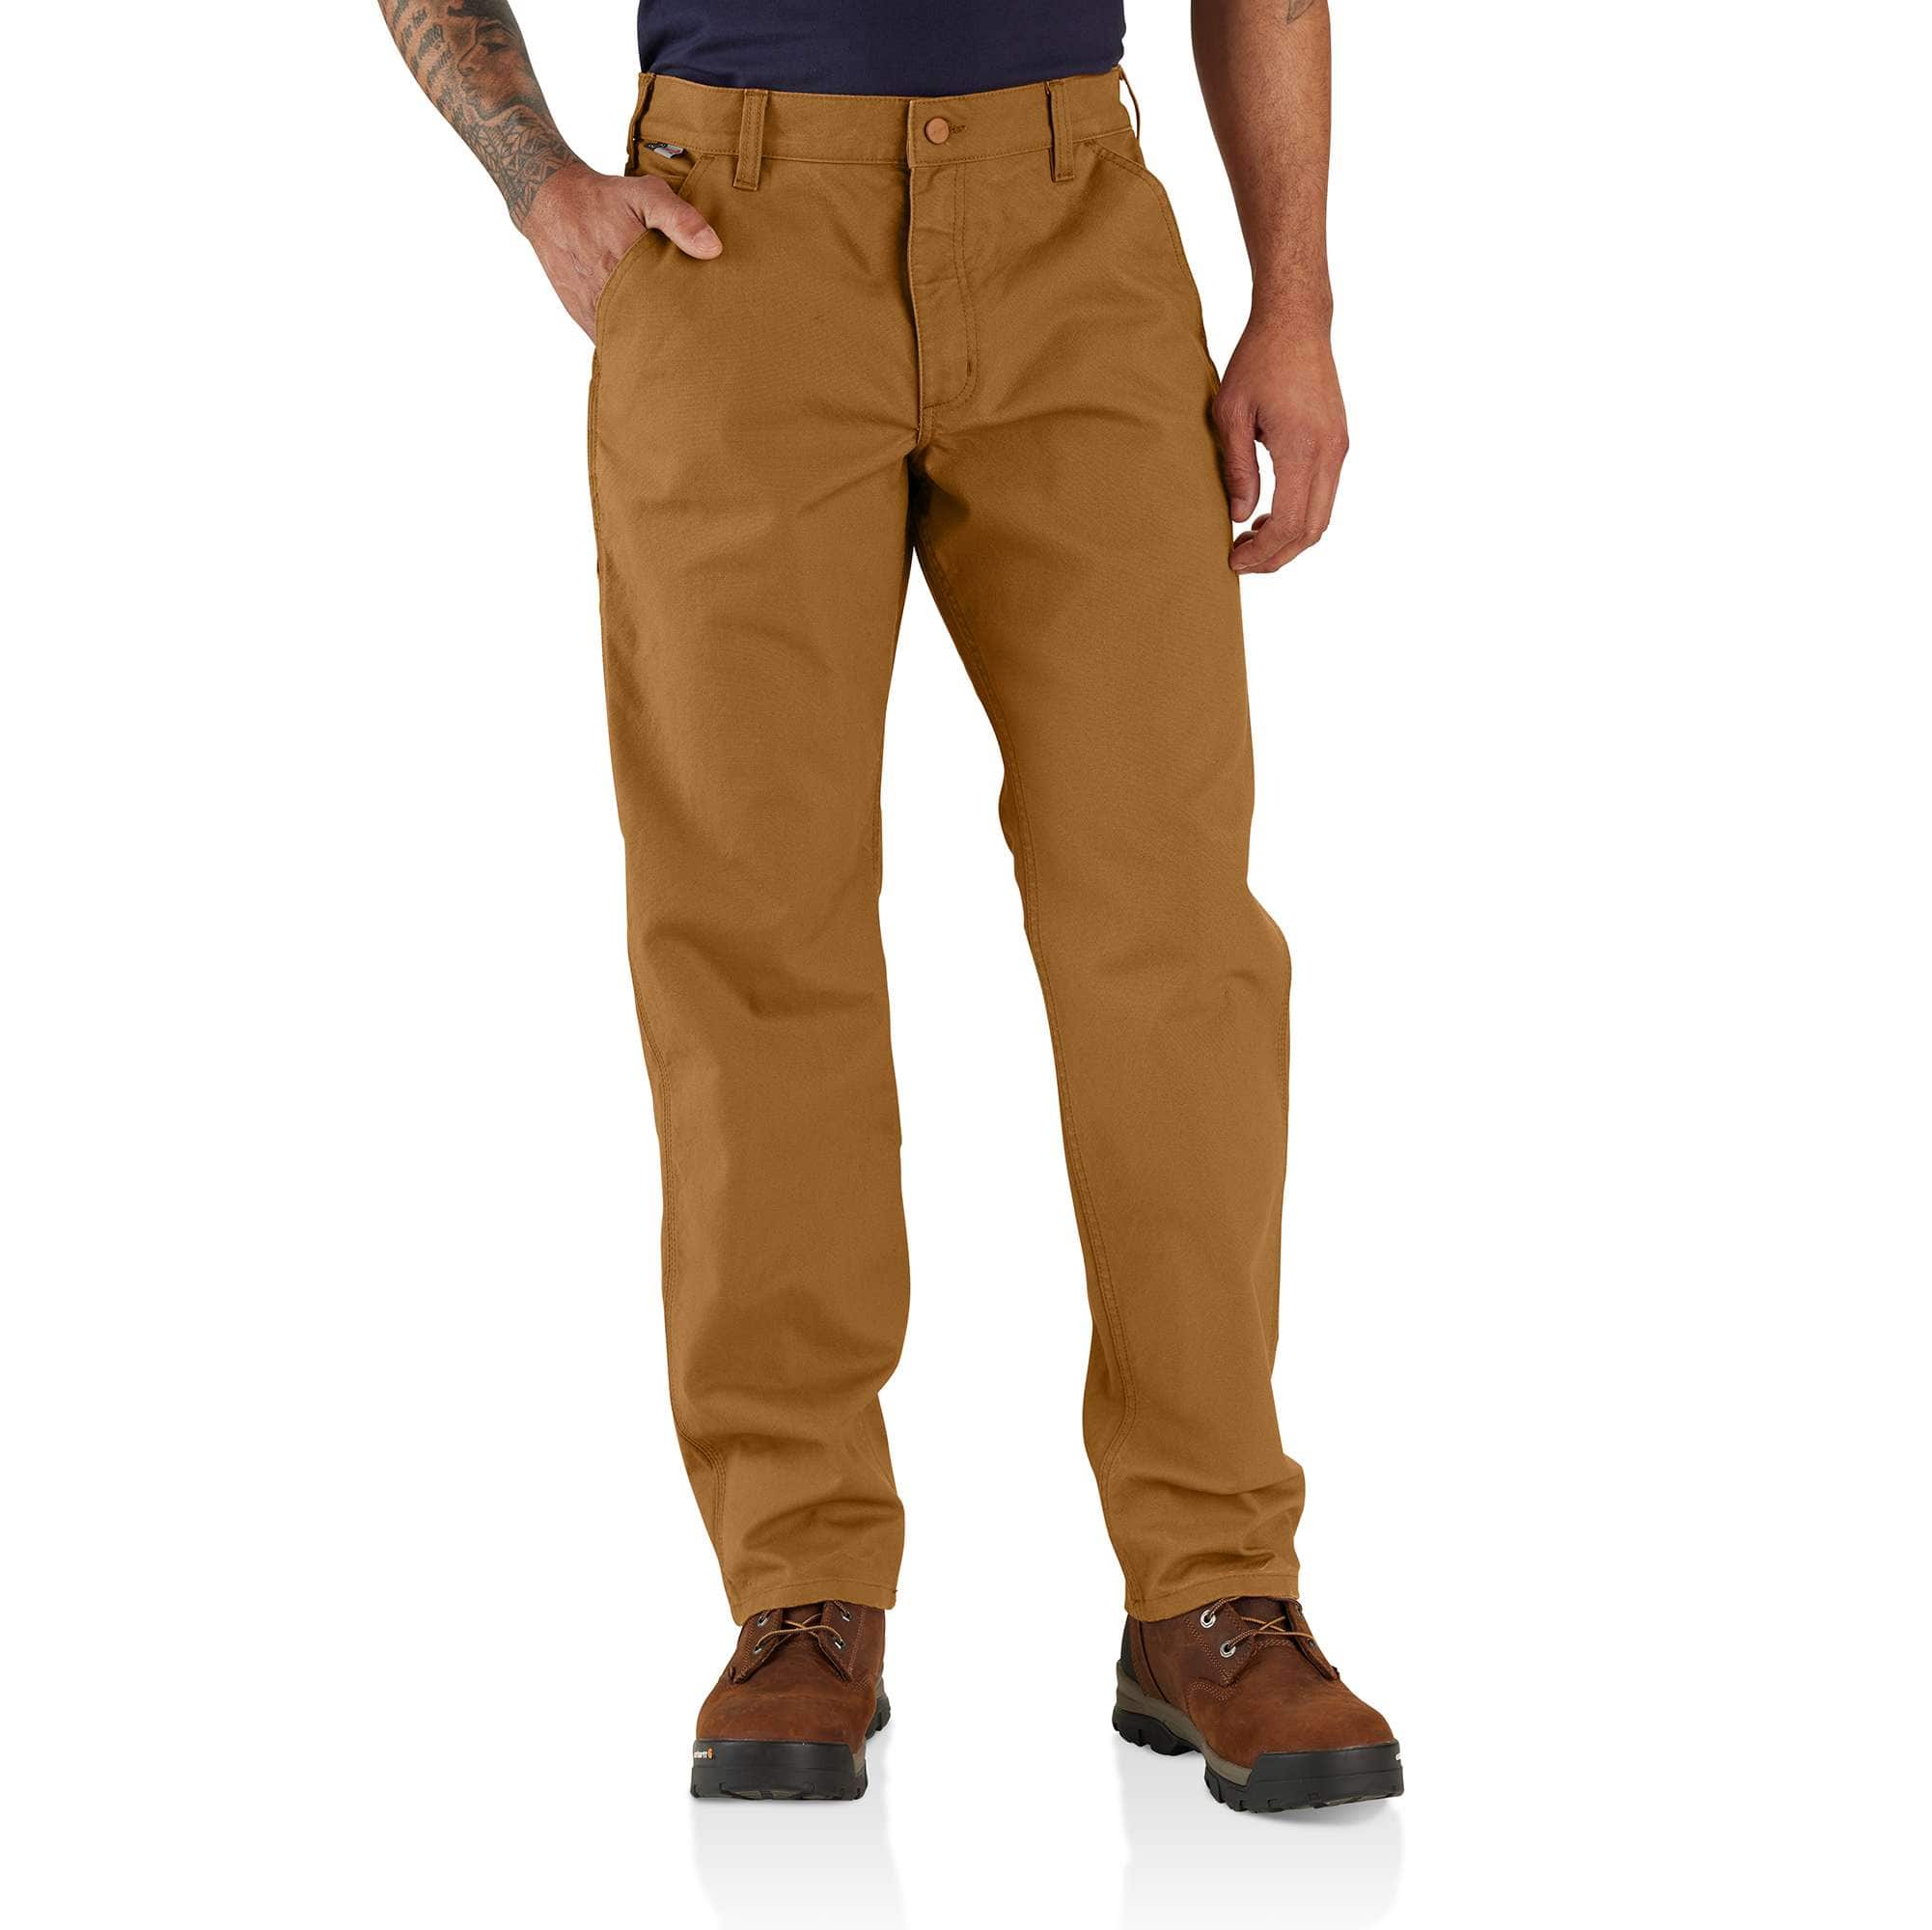 Carhartt Men's Firm Duck Double-Front Work Dungaree 44x30 Carhartt Brown at   Men's Clothing store: Apparel